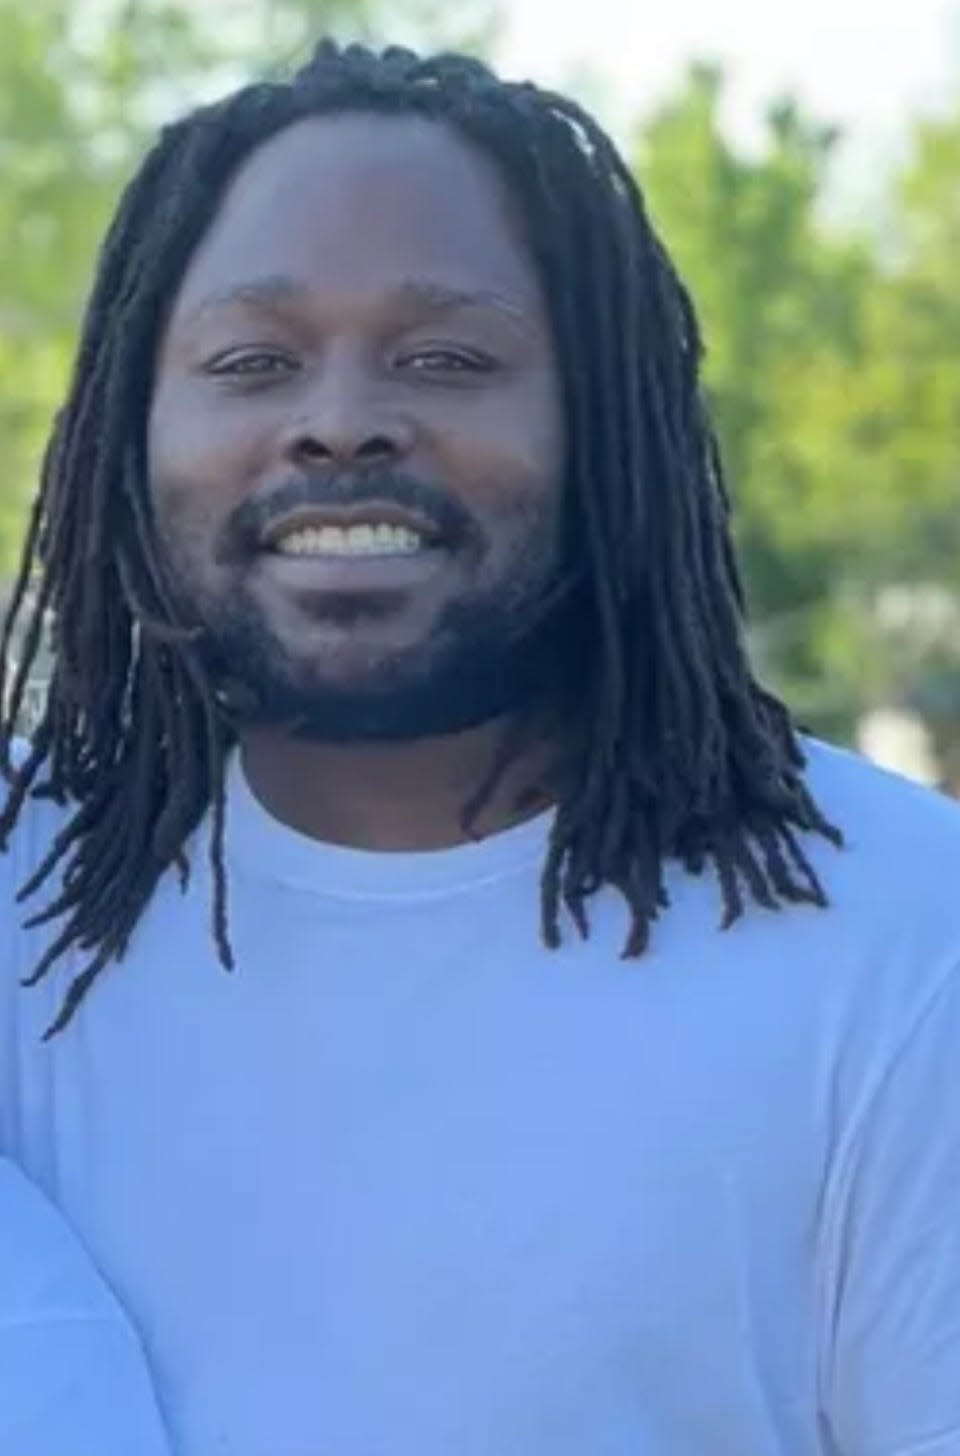 Chris Clark, 30, was the most recent victim found dead in Lady Bird Lake on April 15.